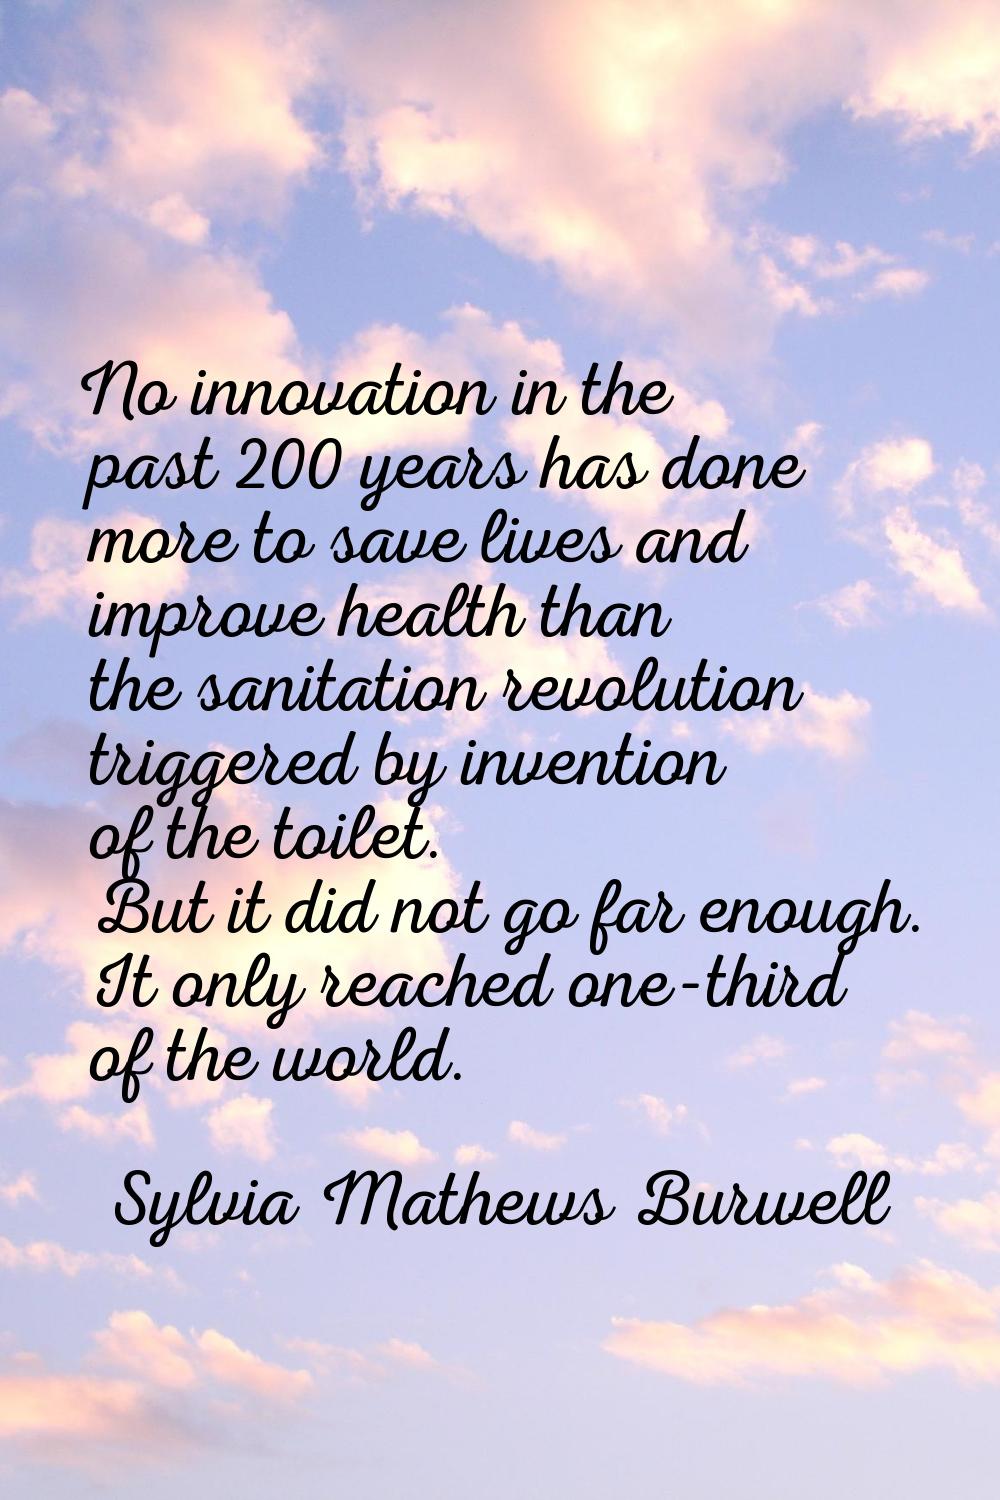 No innovation in the past 200 years has done more to save lives and improve health than the sanitat